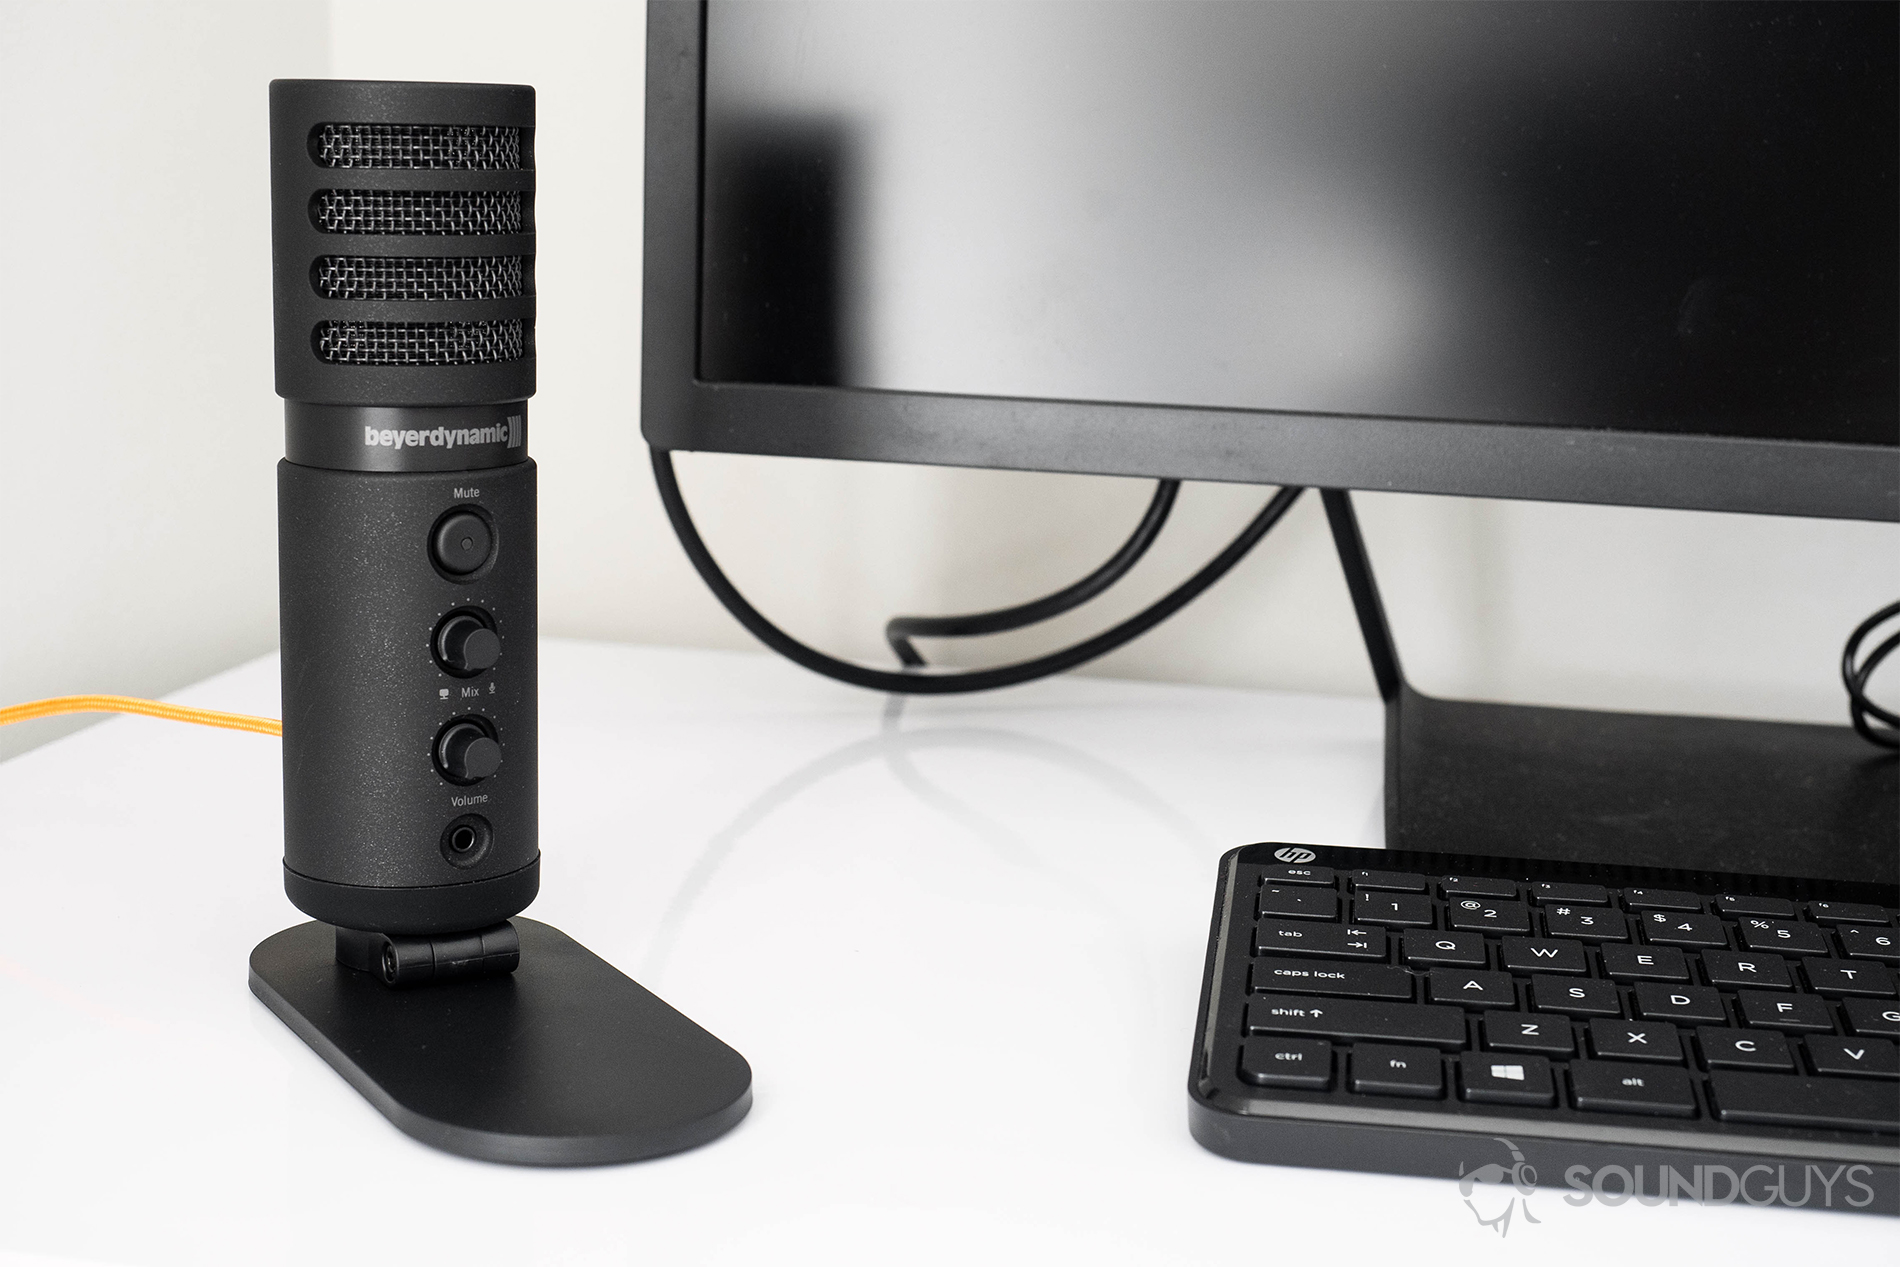 Beyerdynamic Fox USB microphone: A straight-on shot of the mic mounted and on a desk with a black monitor and keyboard.